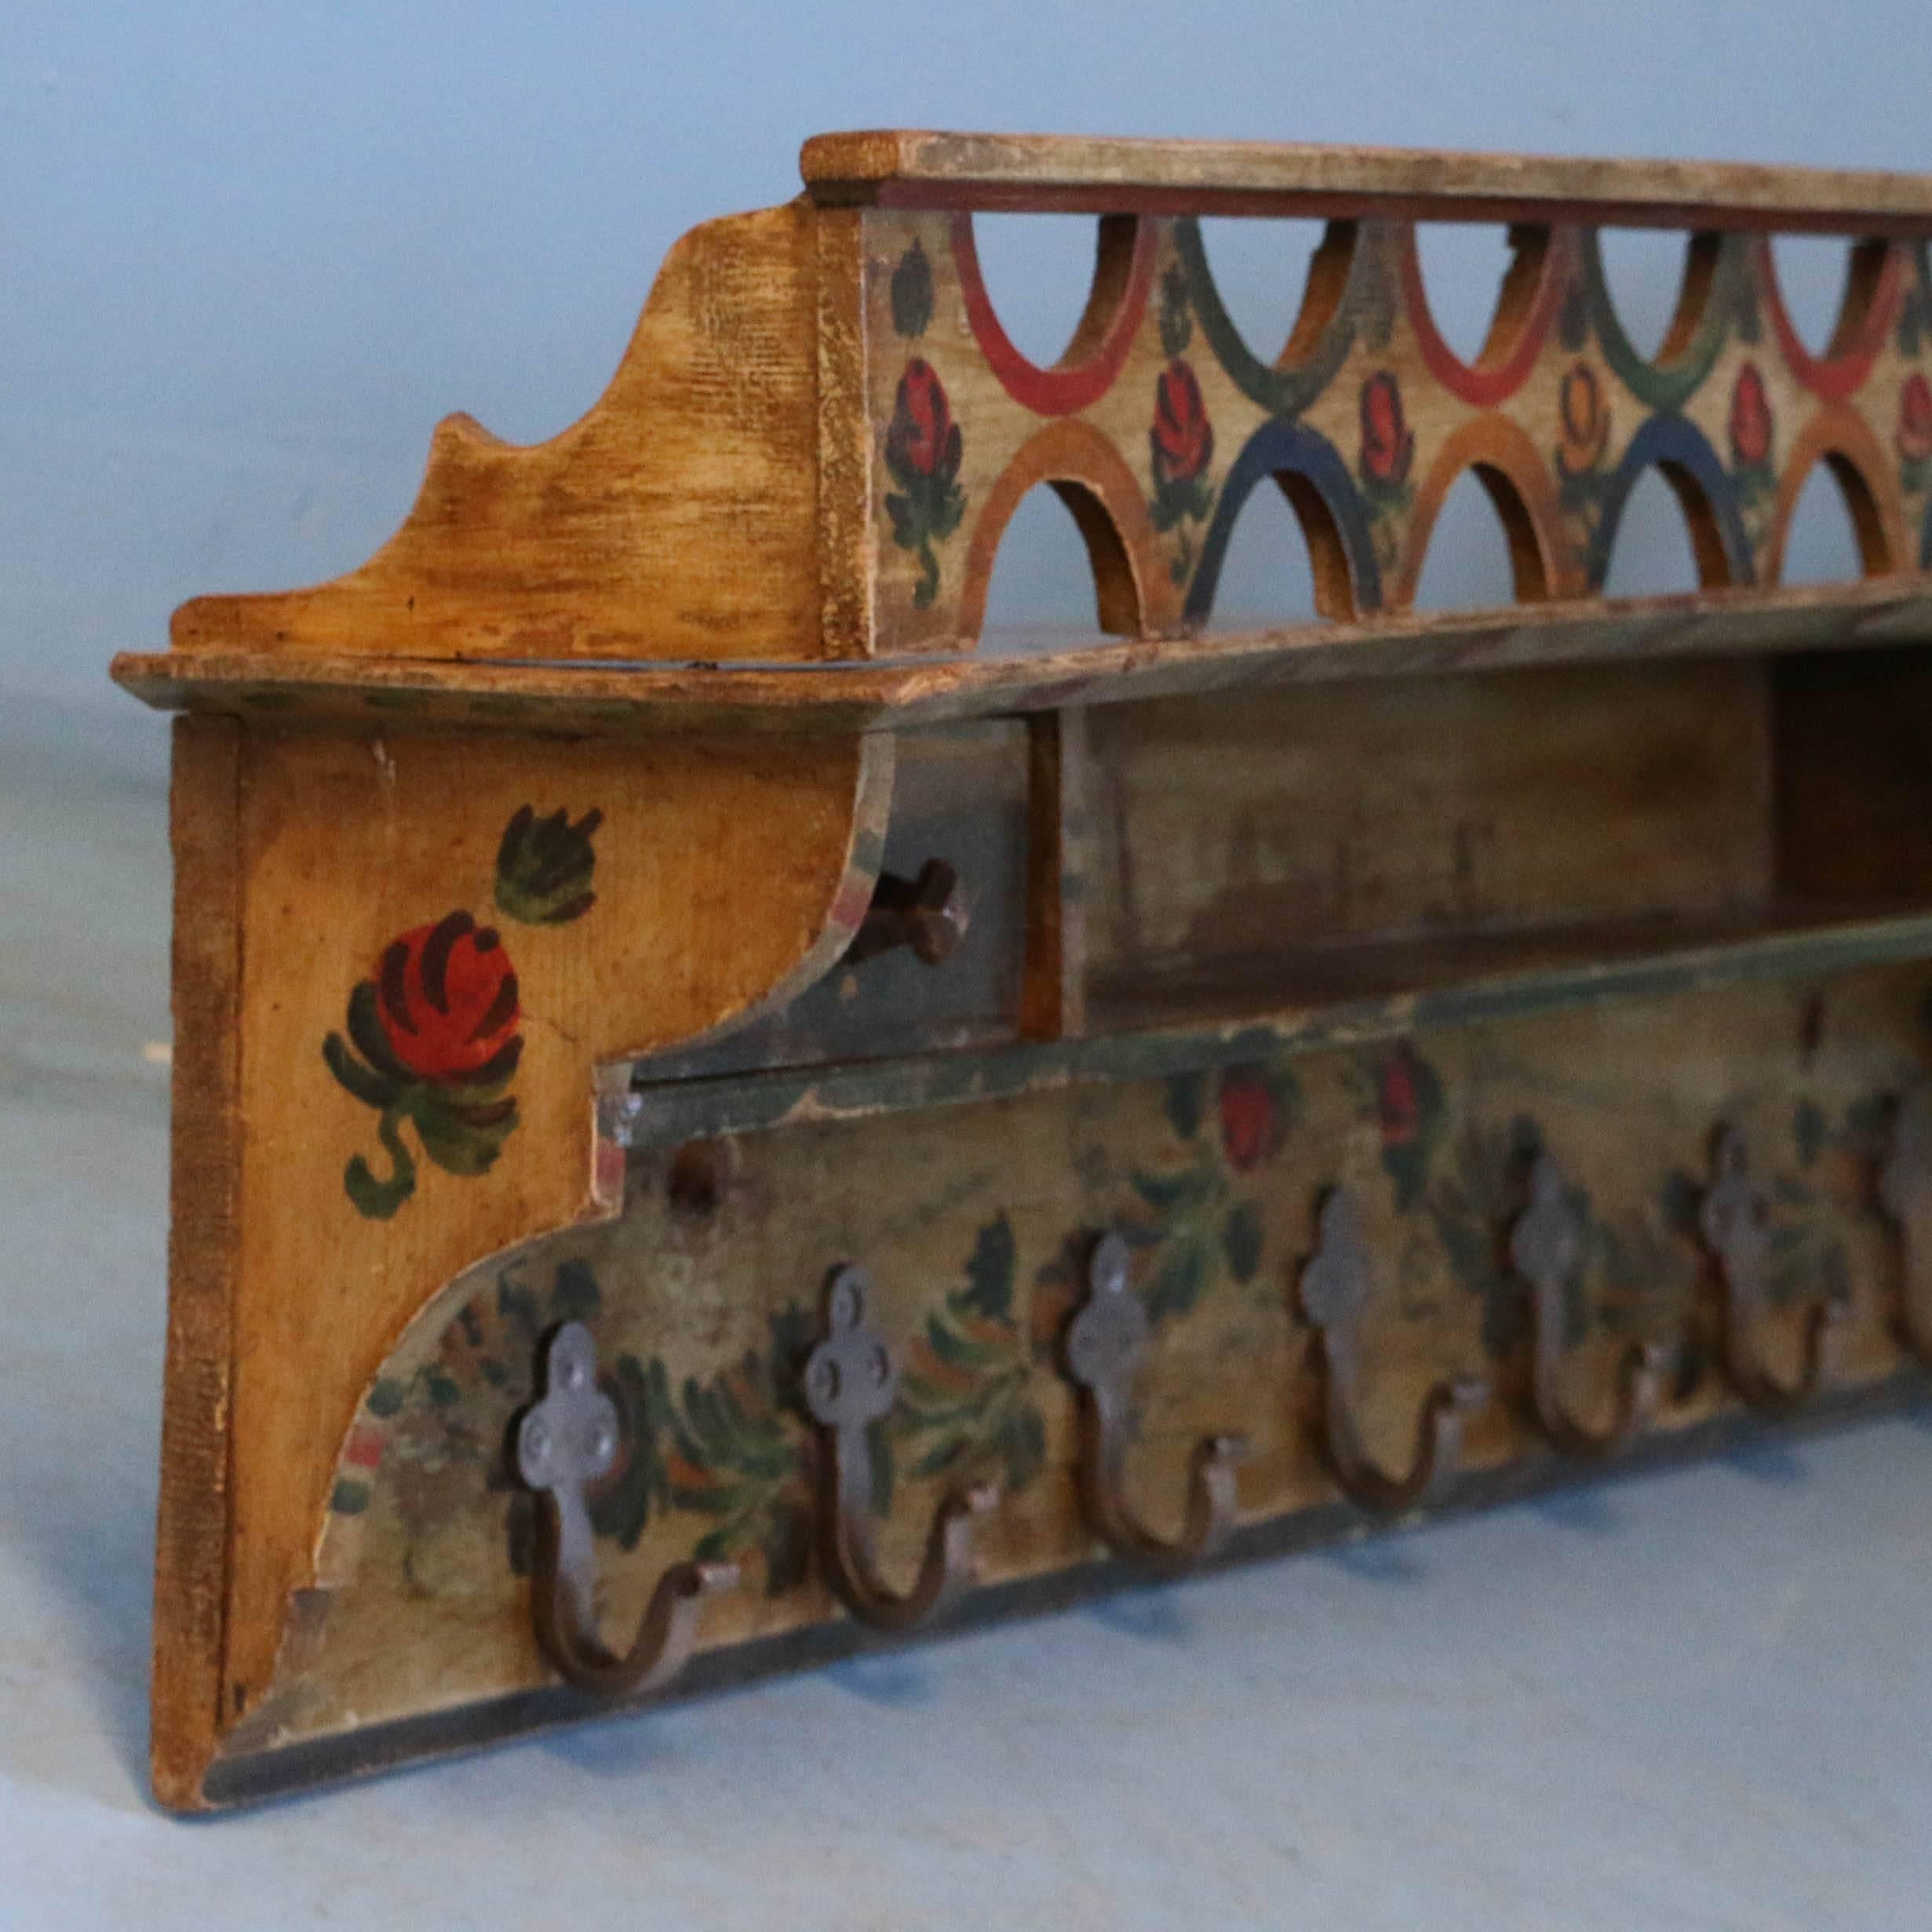 This colors and patina of this wonderful folk art painted wall rack sets this apart from the others. Decorated with a floral design in red, yellow and green over an aged yellow background, it features two small drawers with a shallow shelf between